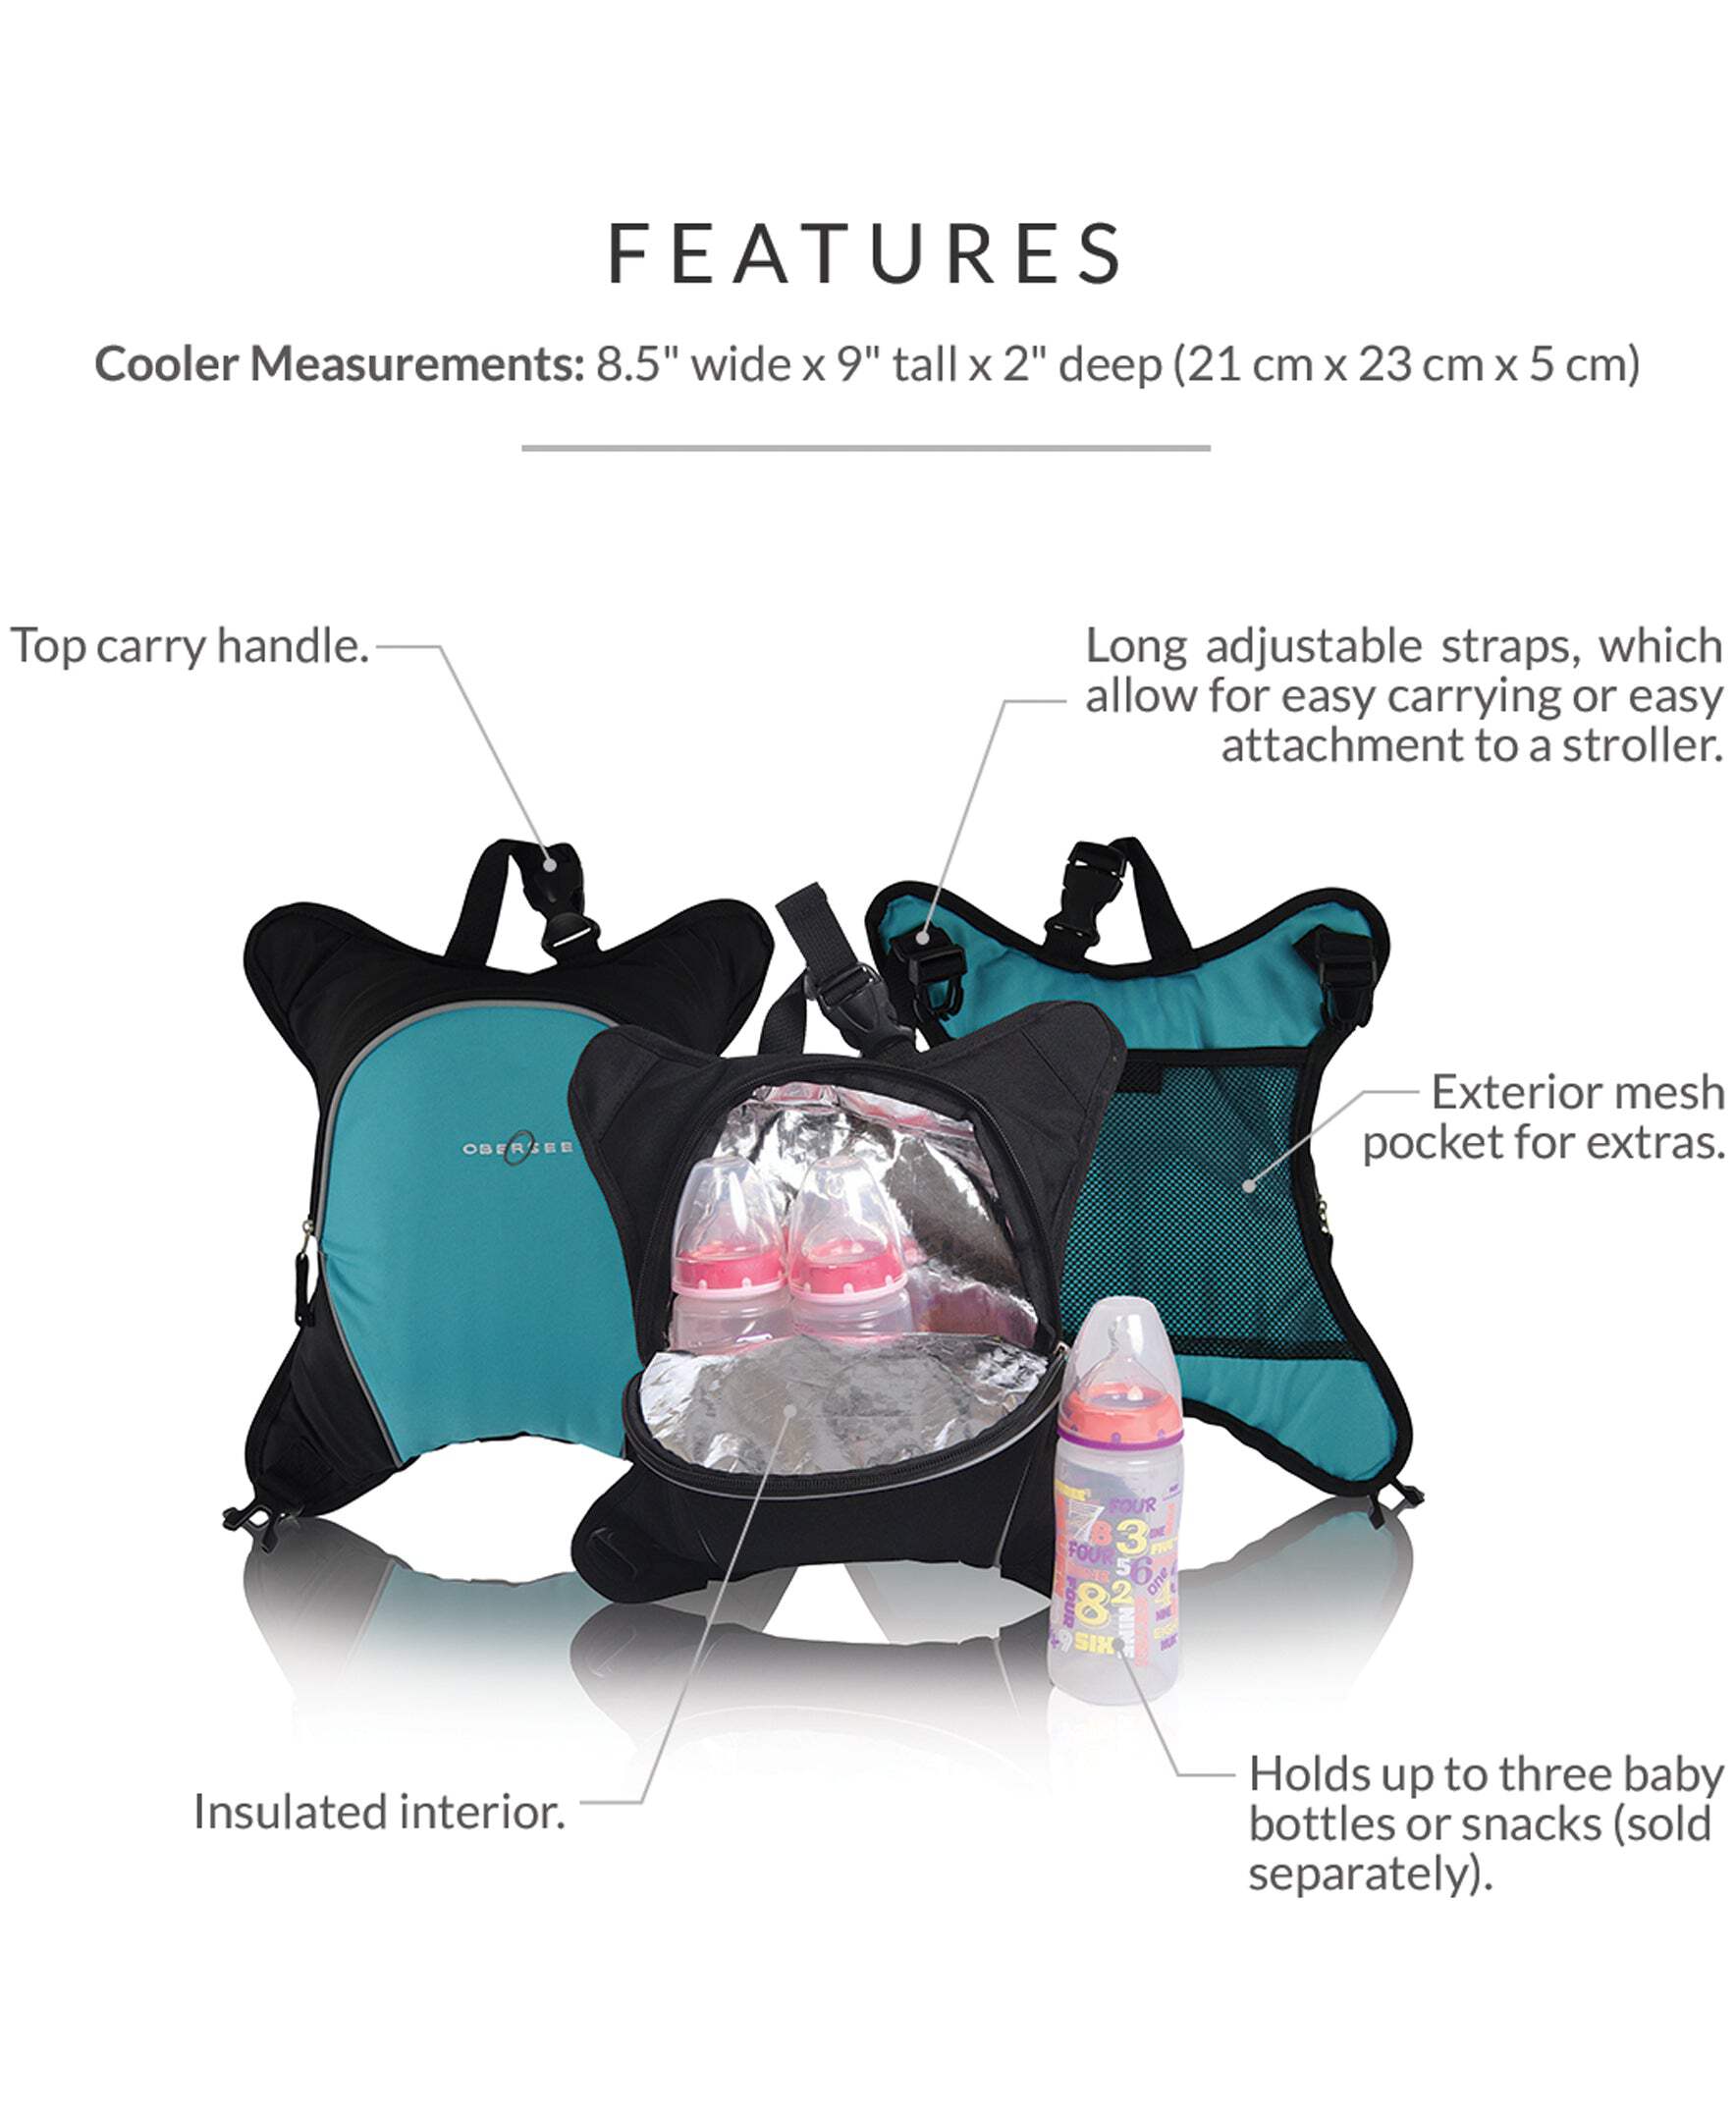 Obersee Oslo Diaper Bag Backpack | Detachable Baby Bottle Snack Cooler | Viola Baby changing kit | clothing cube | wet pouch - image 4 of 11